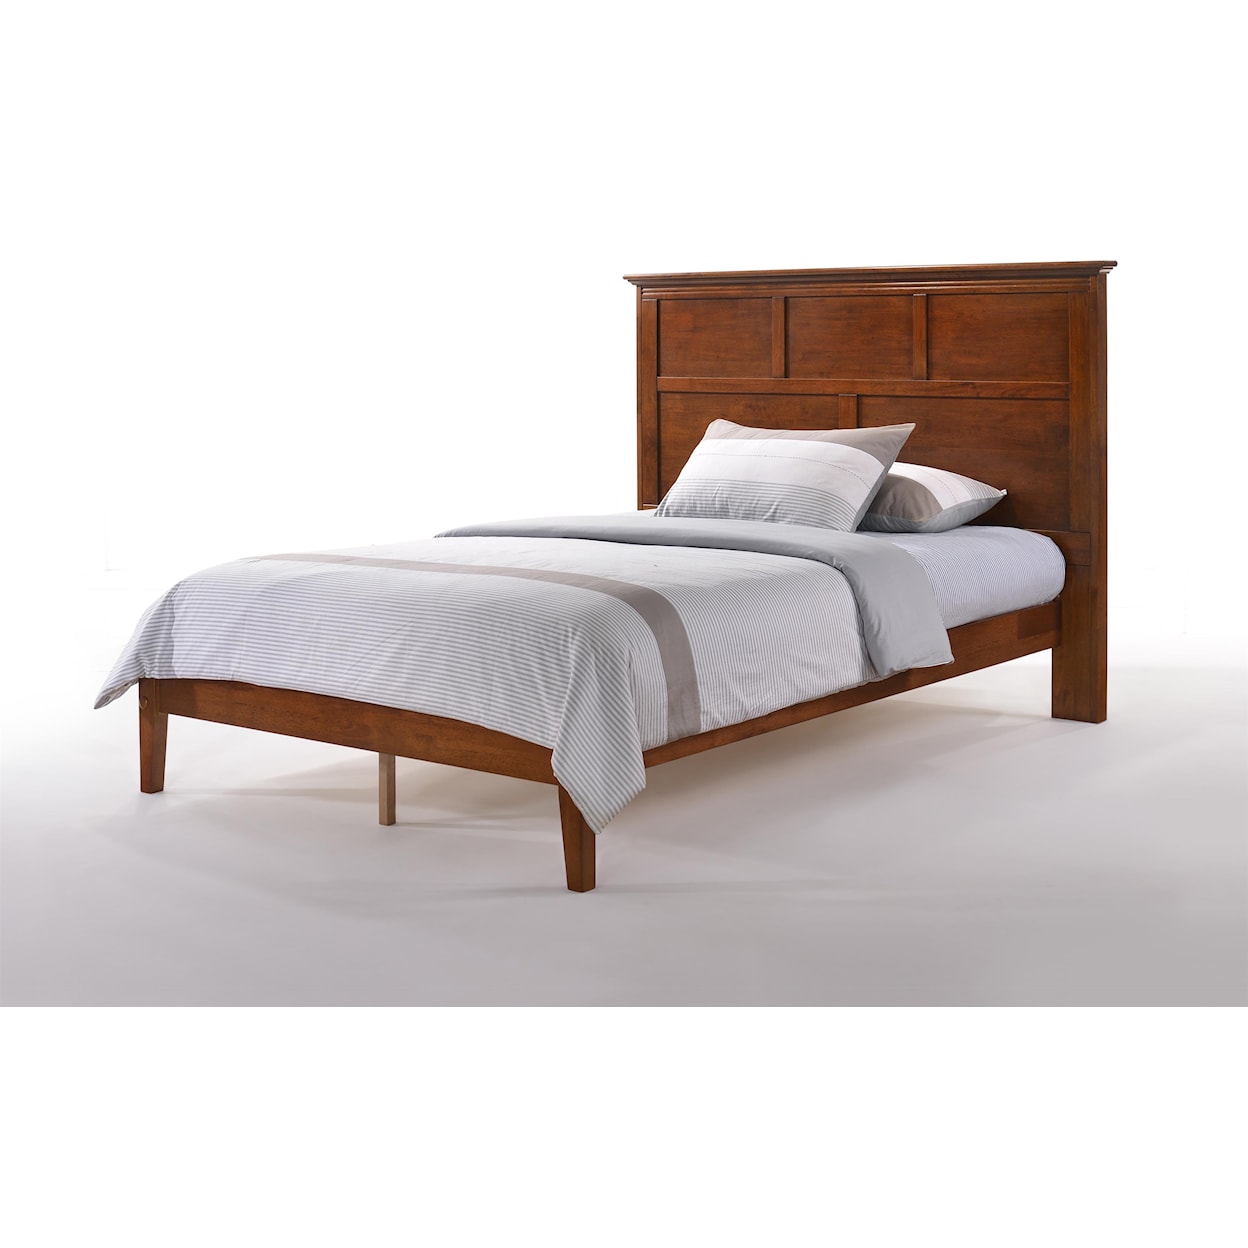 Night & Day Furniture Spice Tarragon Cherry Full Bed